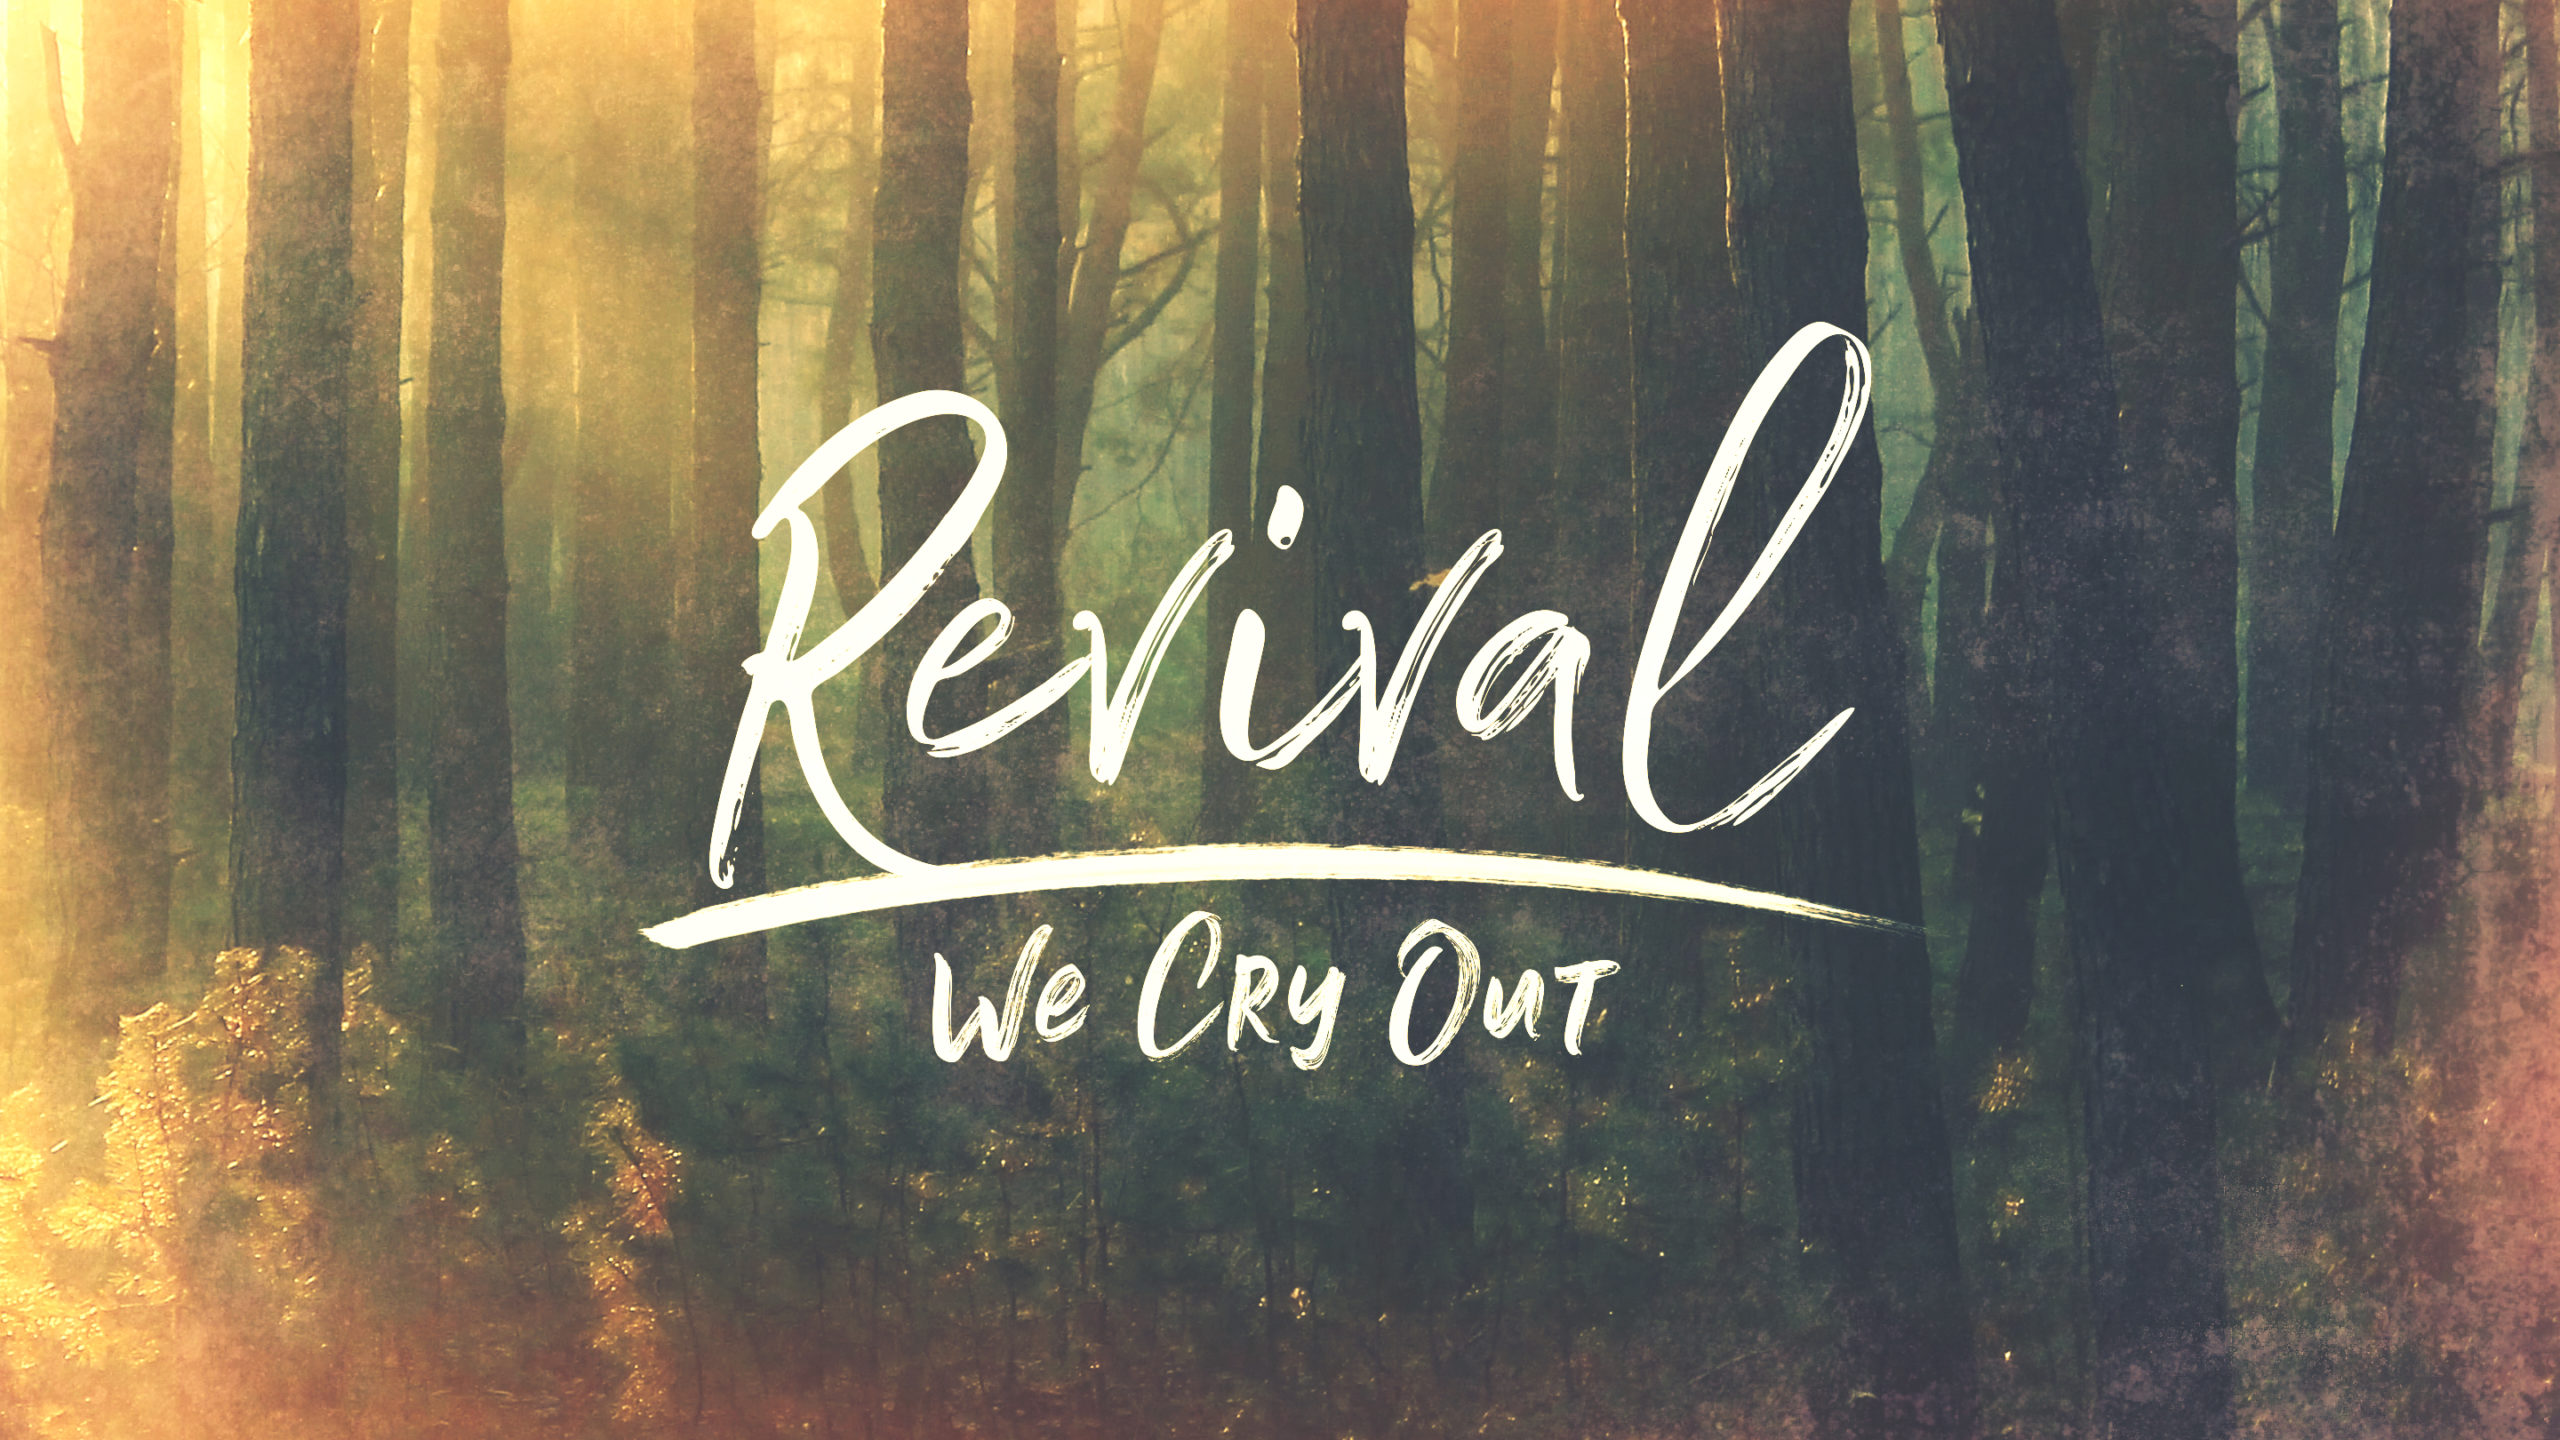 What is Revival?